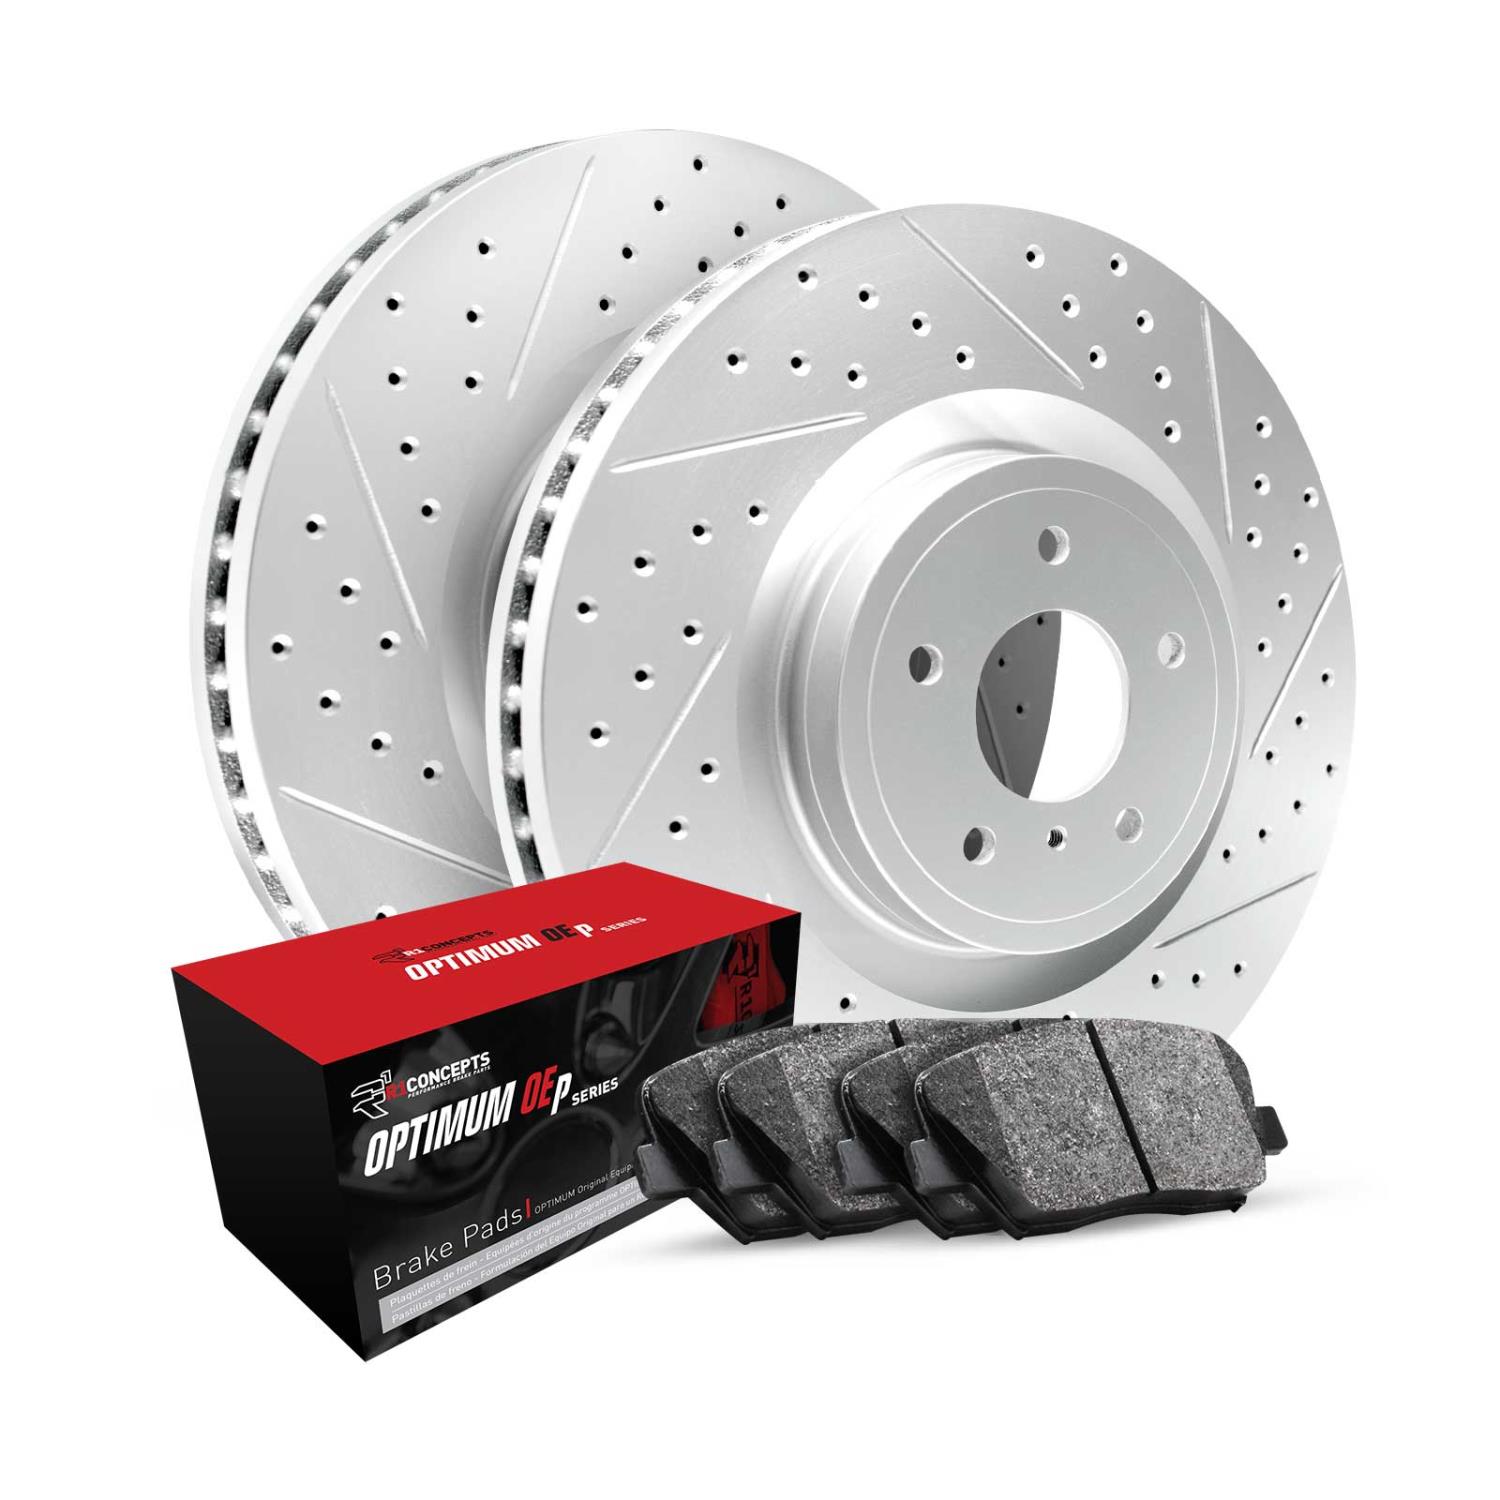 GEO-Carbon Drilled & Slotted Brake Rotor Set w/Optimum OE Pads, 1999-2002 Ford/Lincoln/Mercury/Mazda, Position: Front & Rear